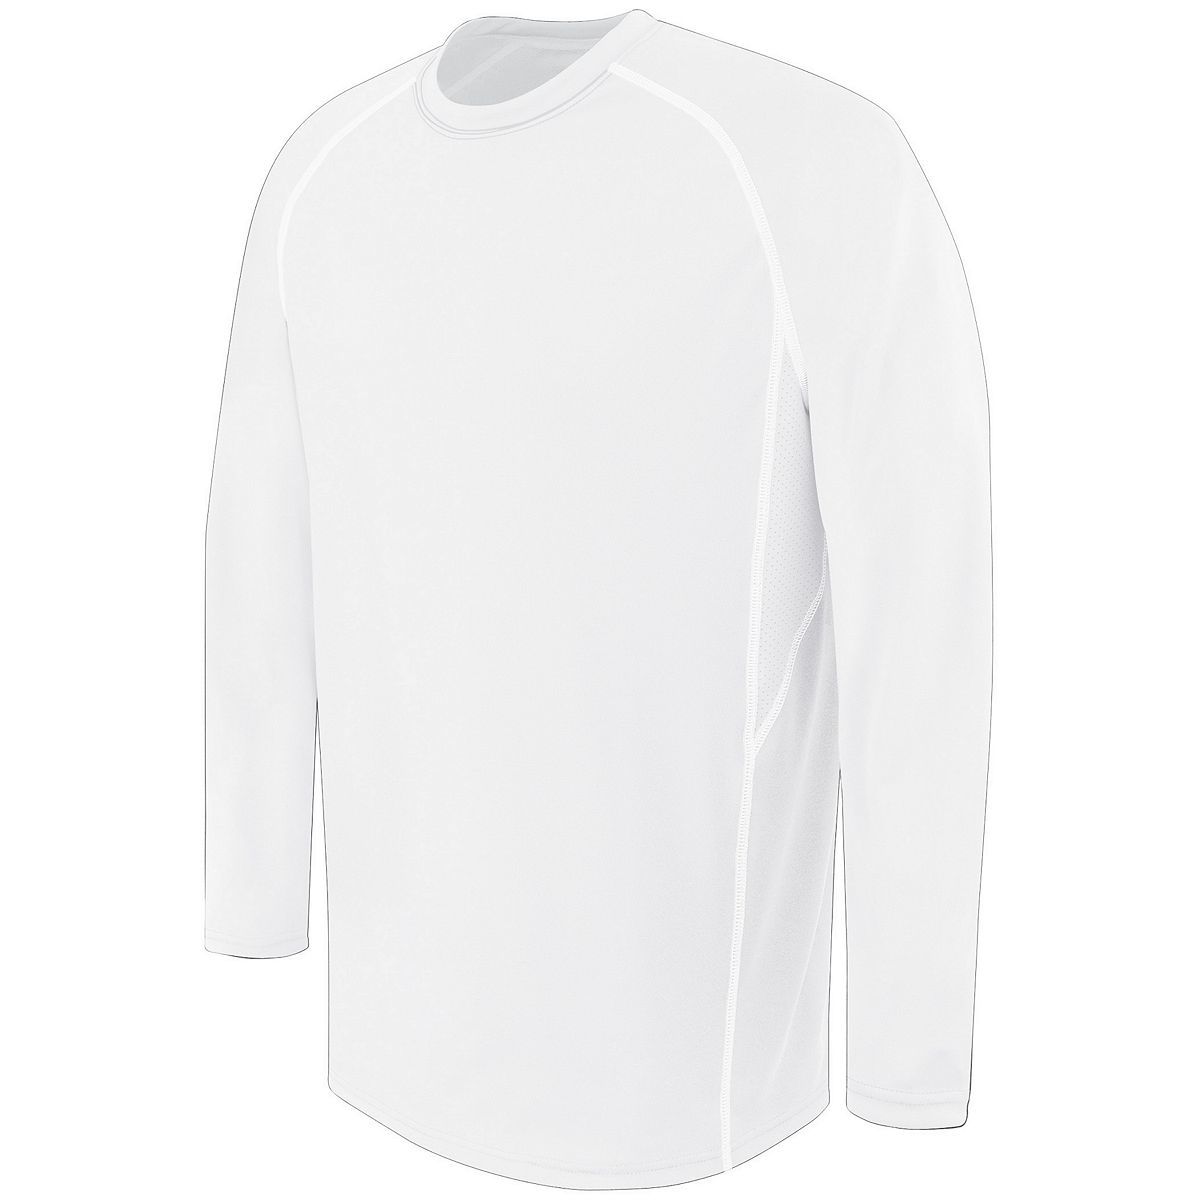 High 5 Adult Long Sleeve Evolution Top in White/White/White  -Part of the Adult, High5-Products, Shirts product lines at KanaleyCreations.com